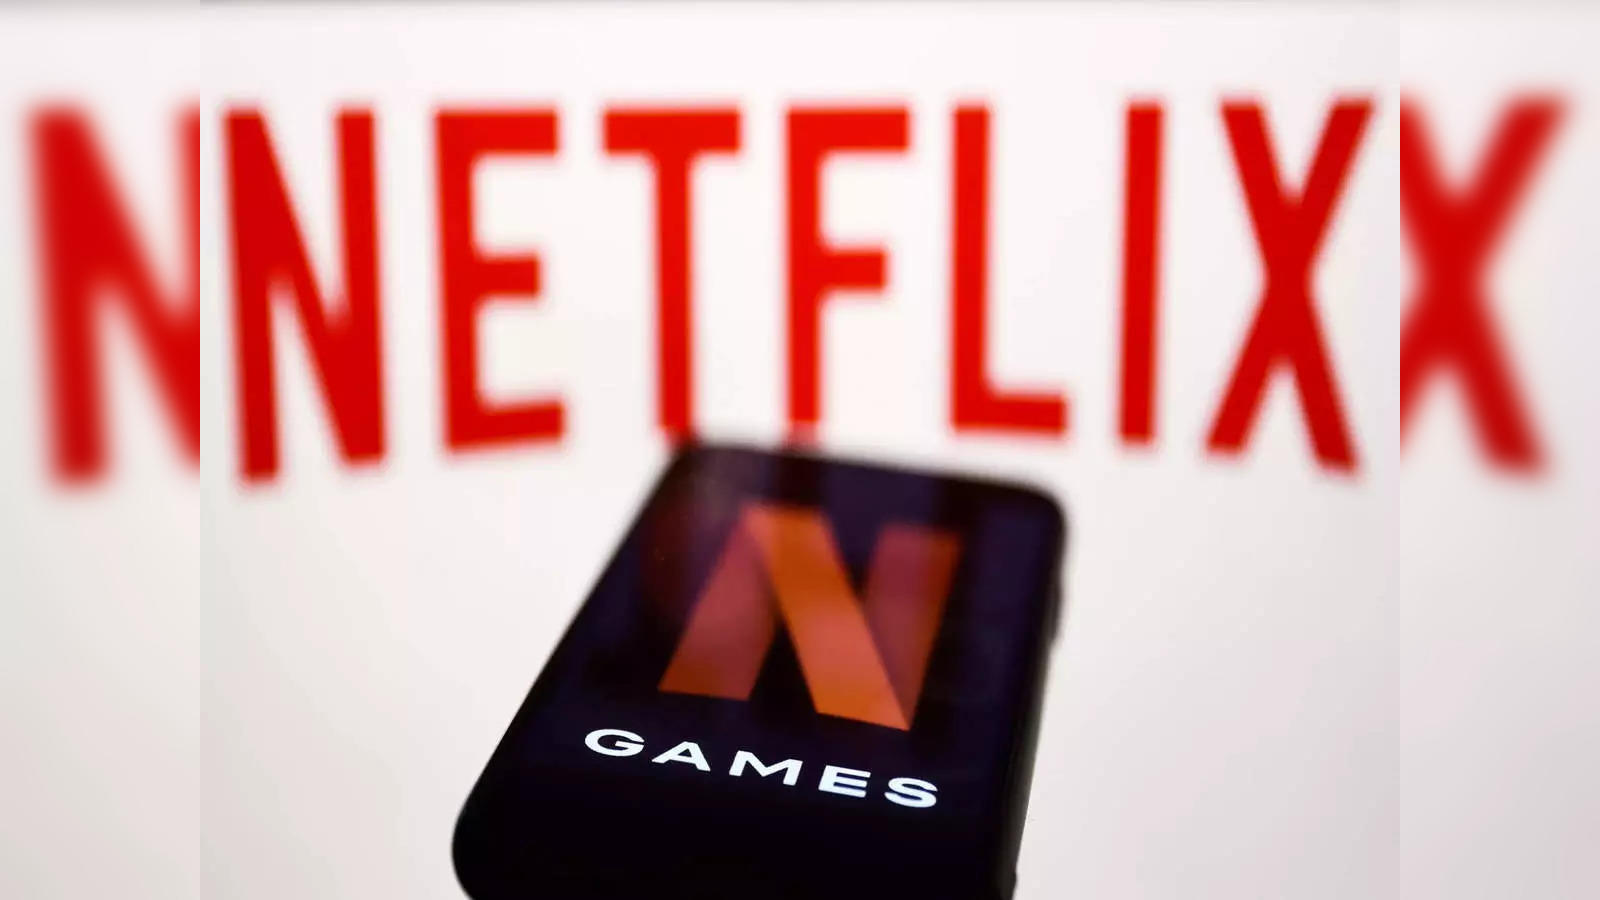 Netflix games are coming to all members on Android, starting this week